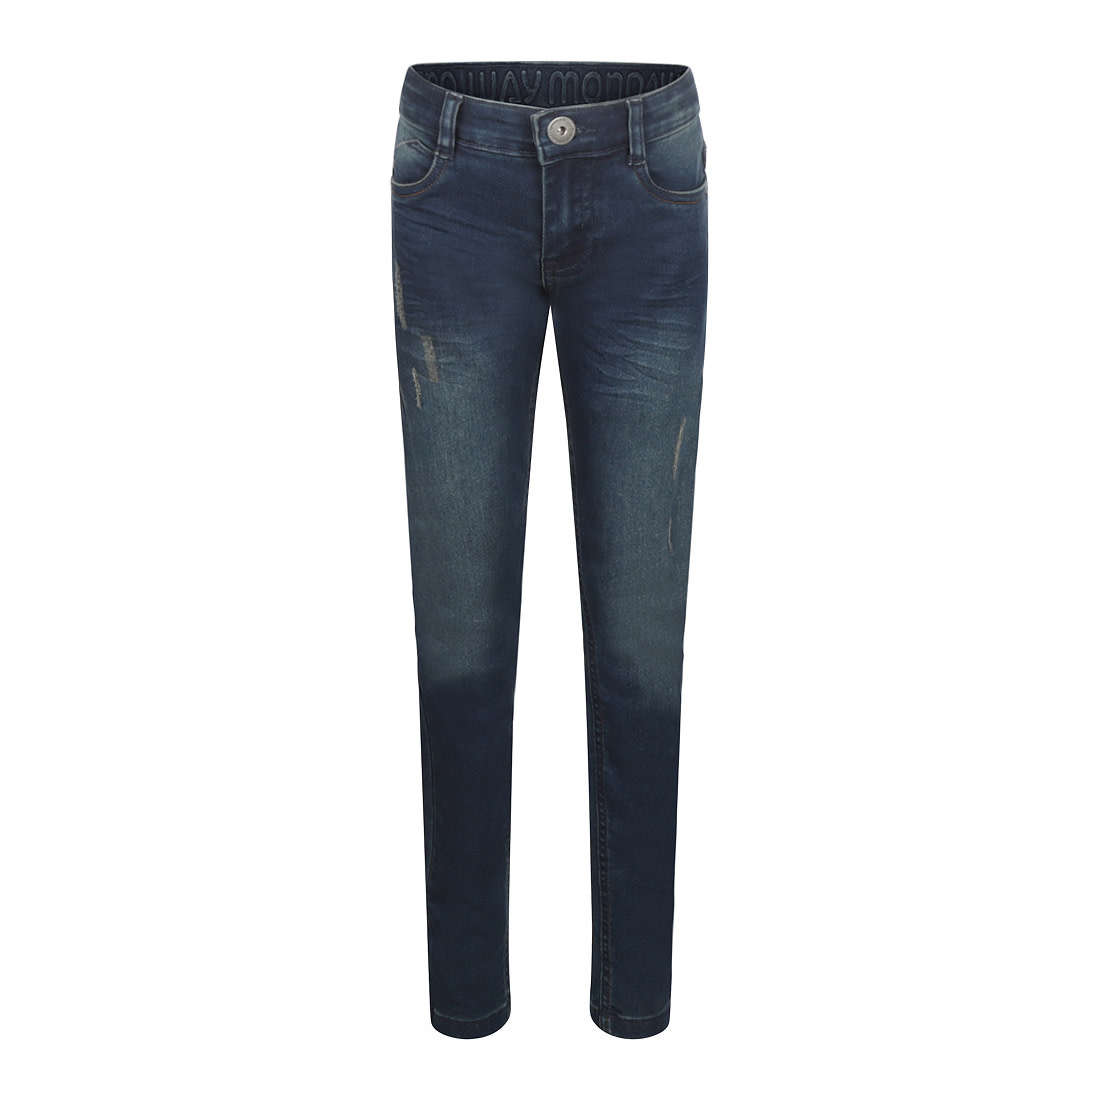 Slim Fit Jeans with Minor Distressing